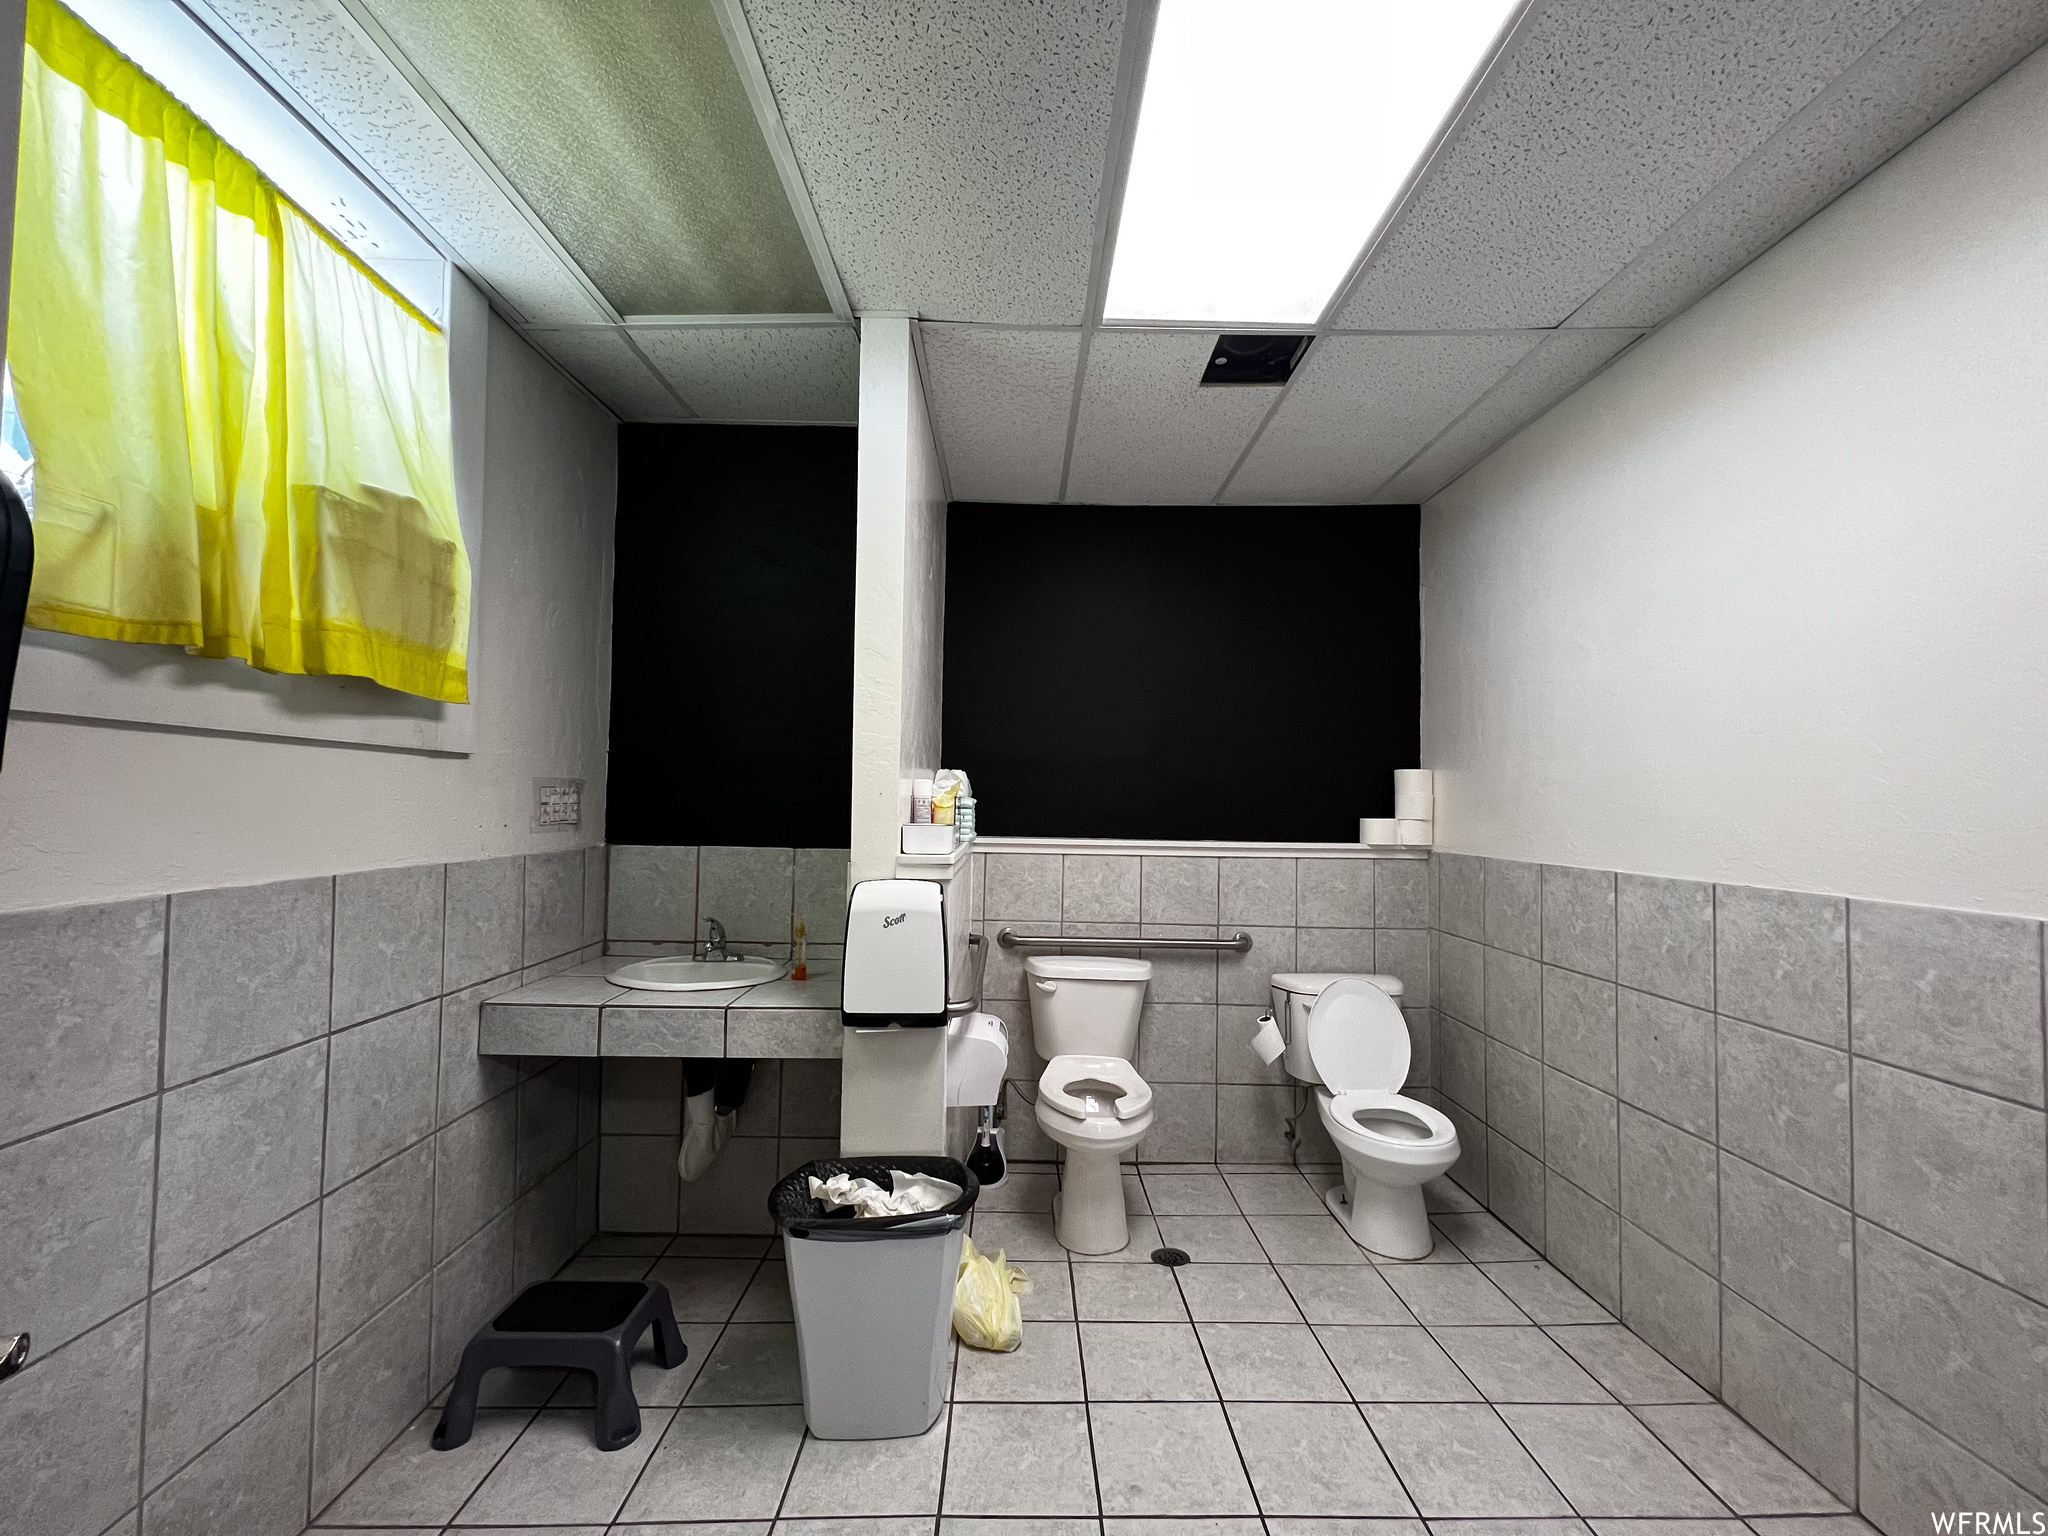 Bathroom with tile walls, light tile floors, a drop ceiling, and sink